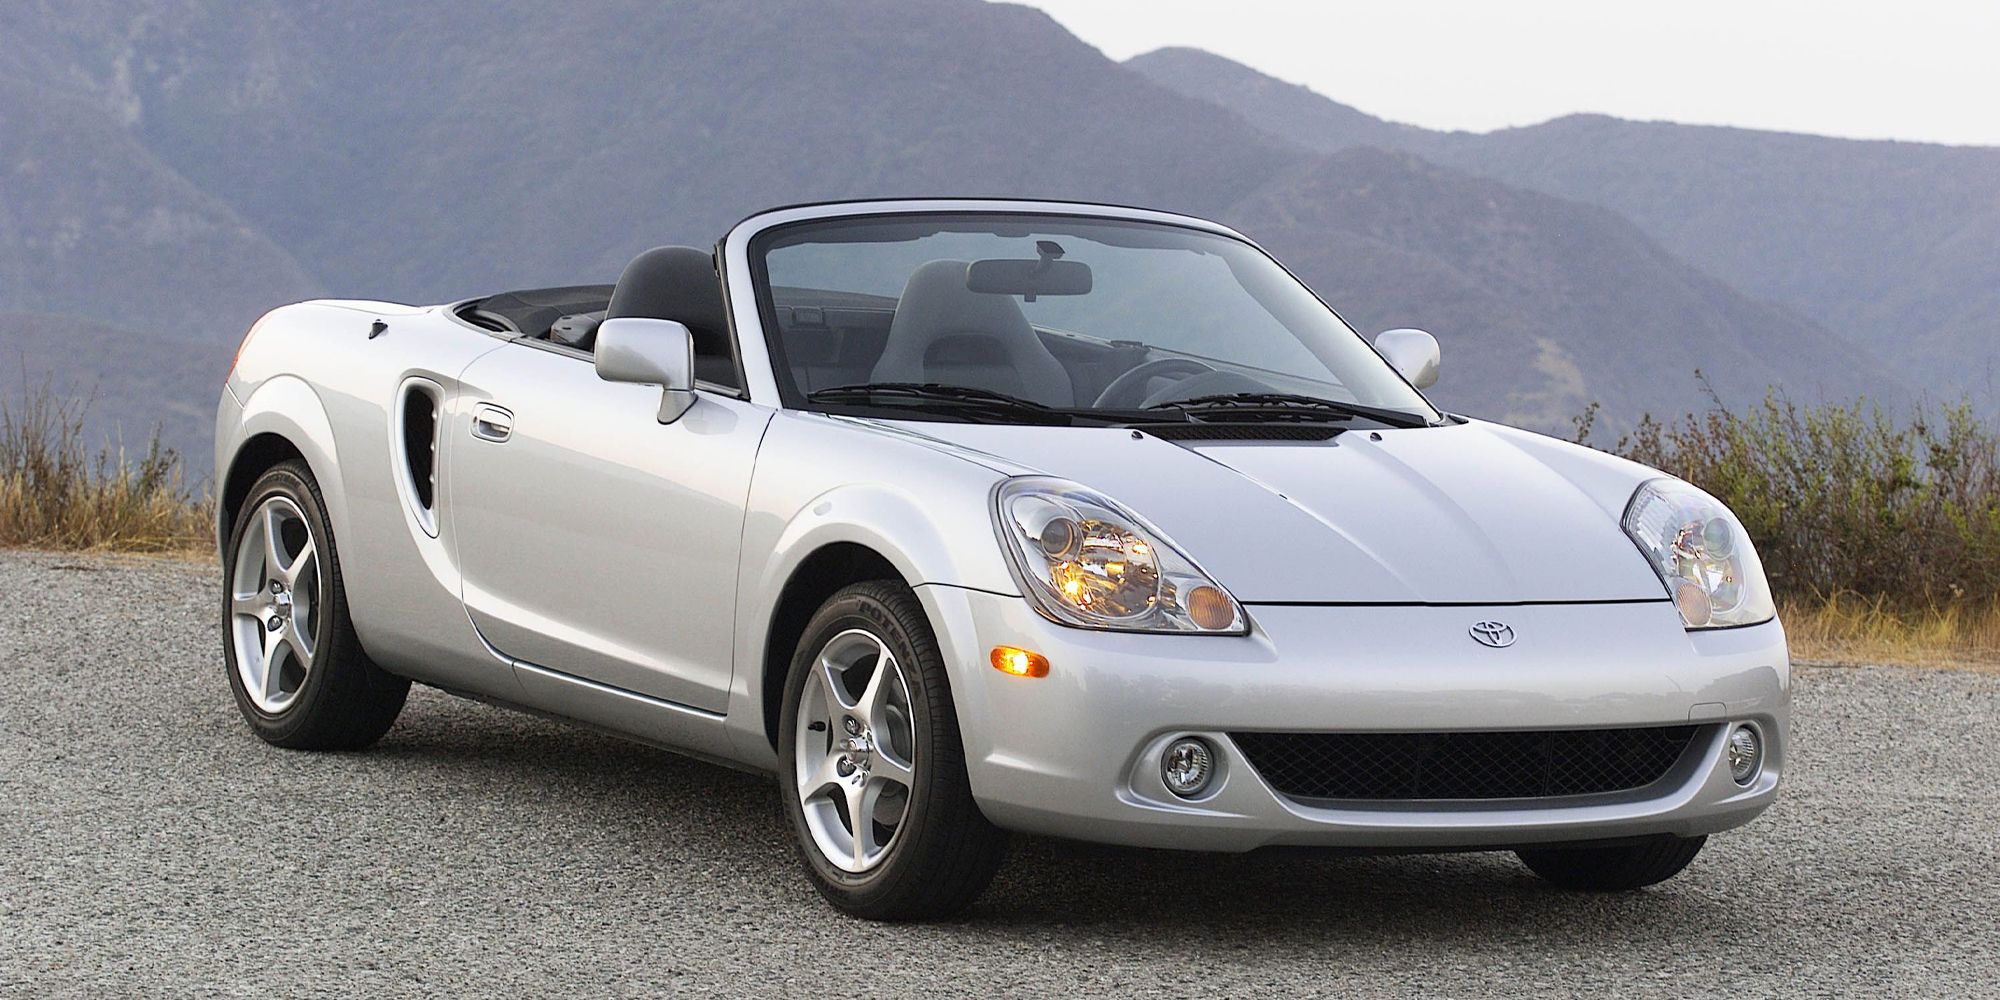 A silver MR2 Spyder with the top down